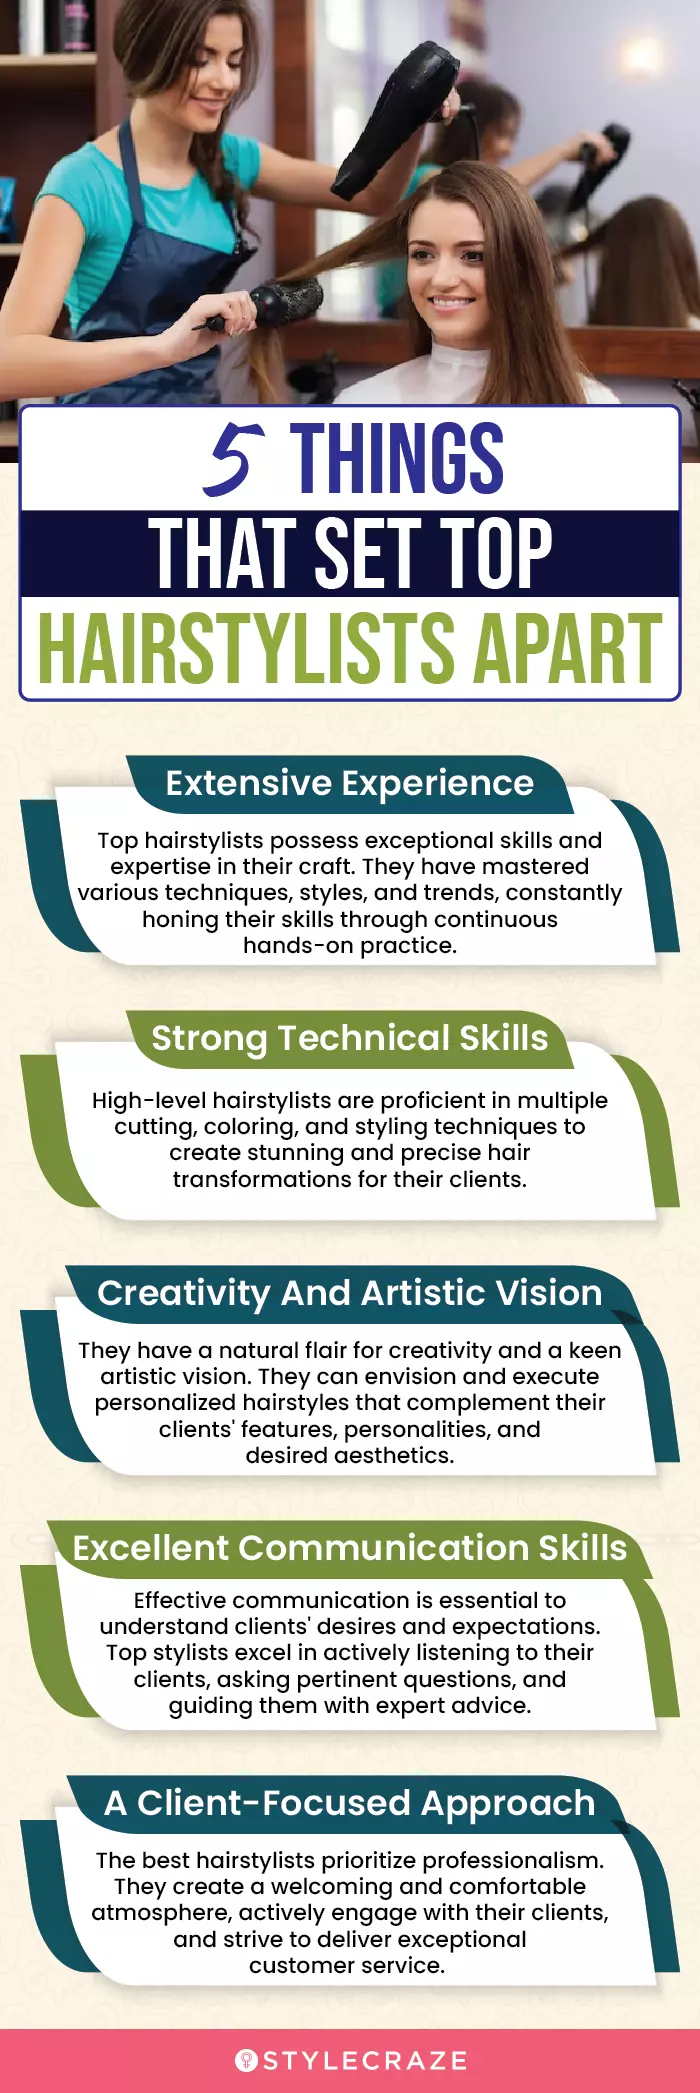 5 things that set top hairstylists apart (infographic)